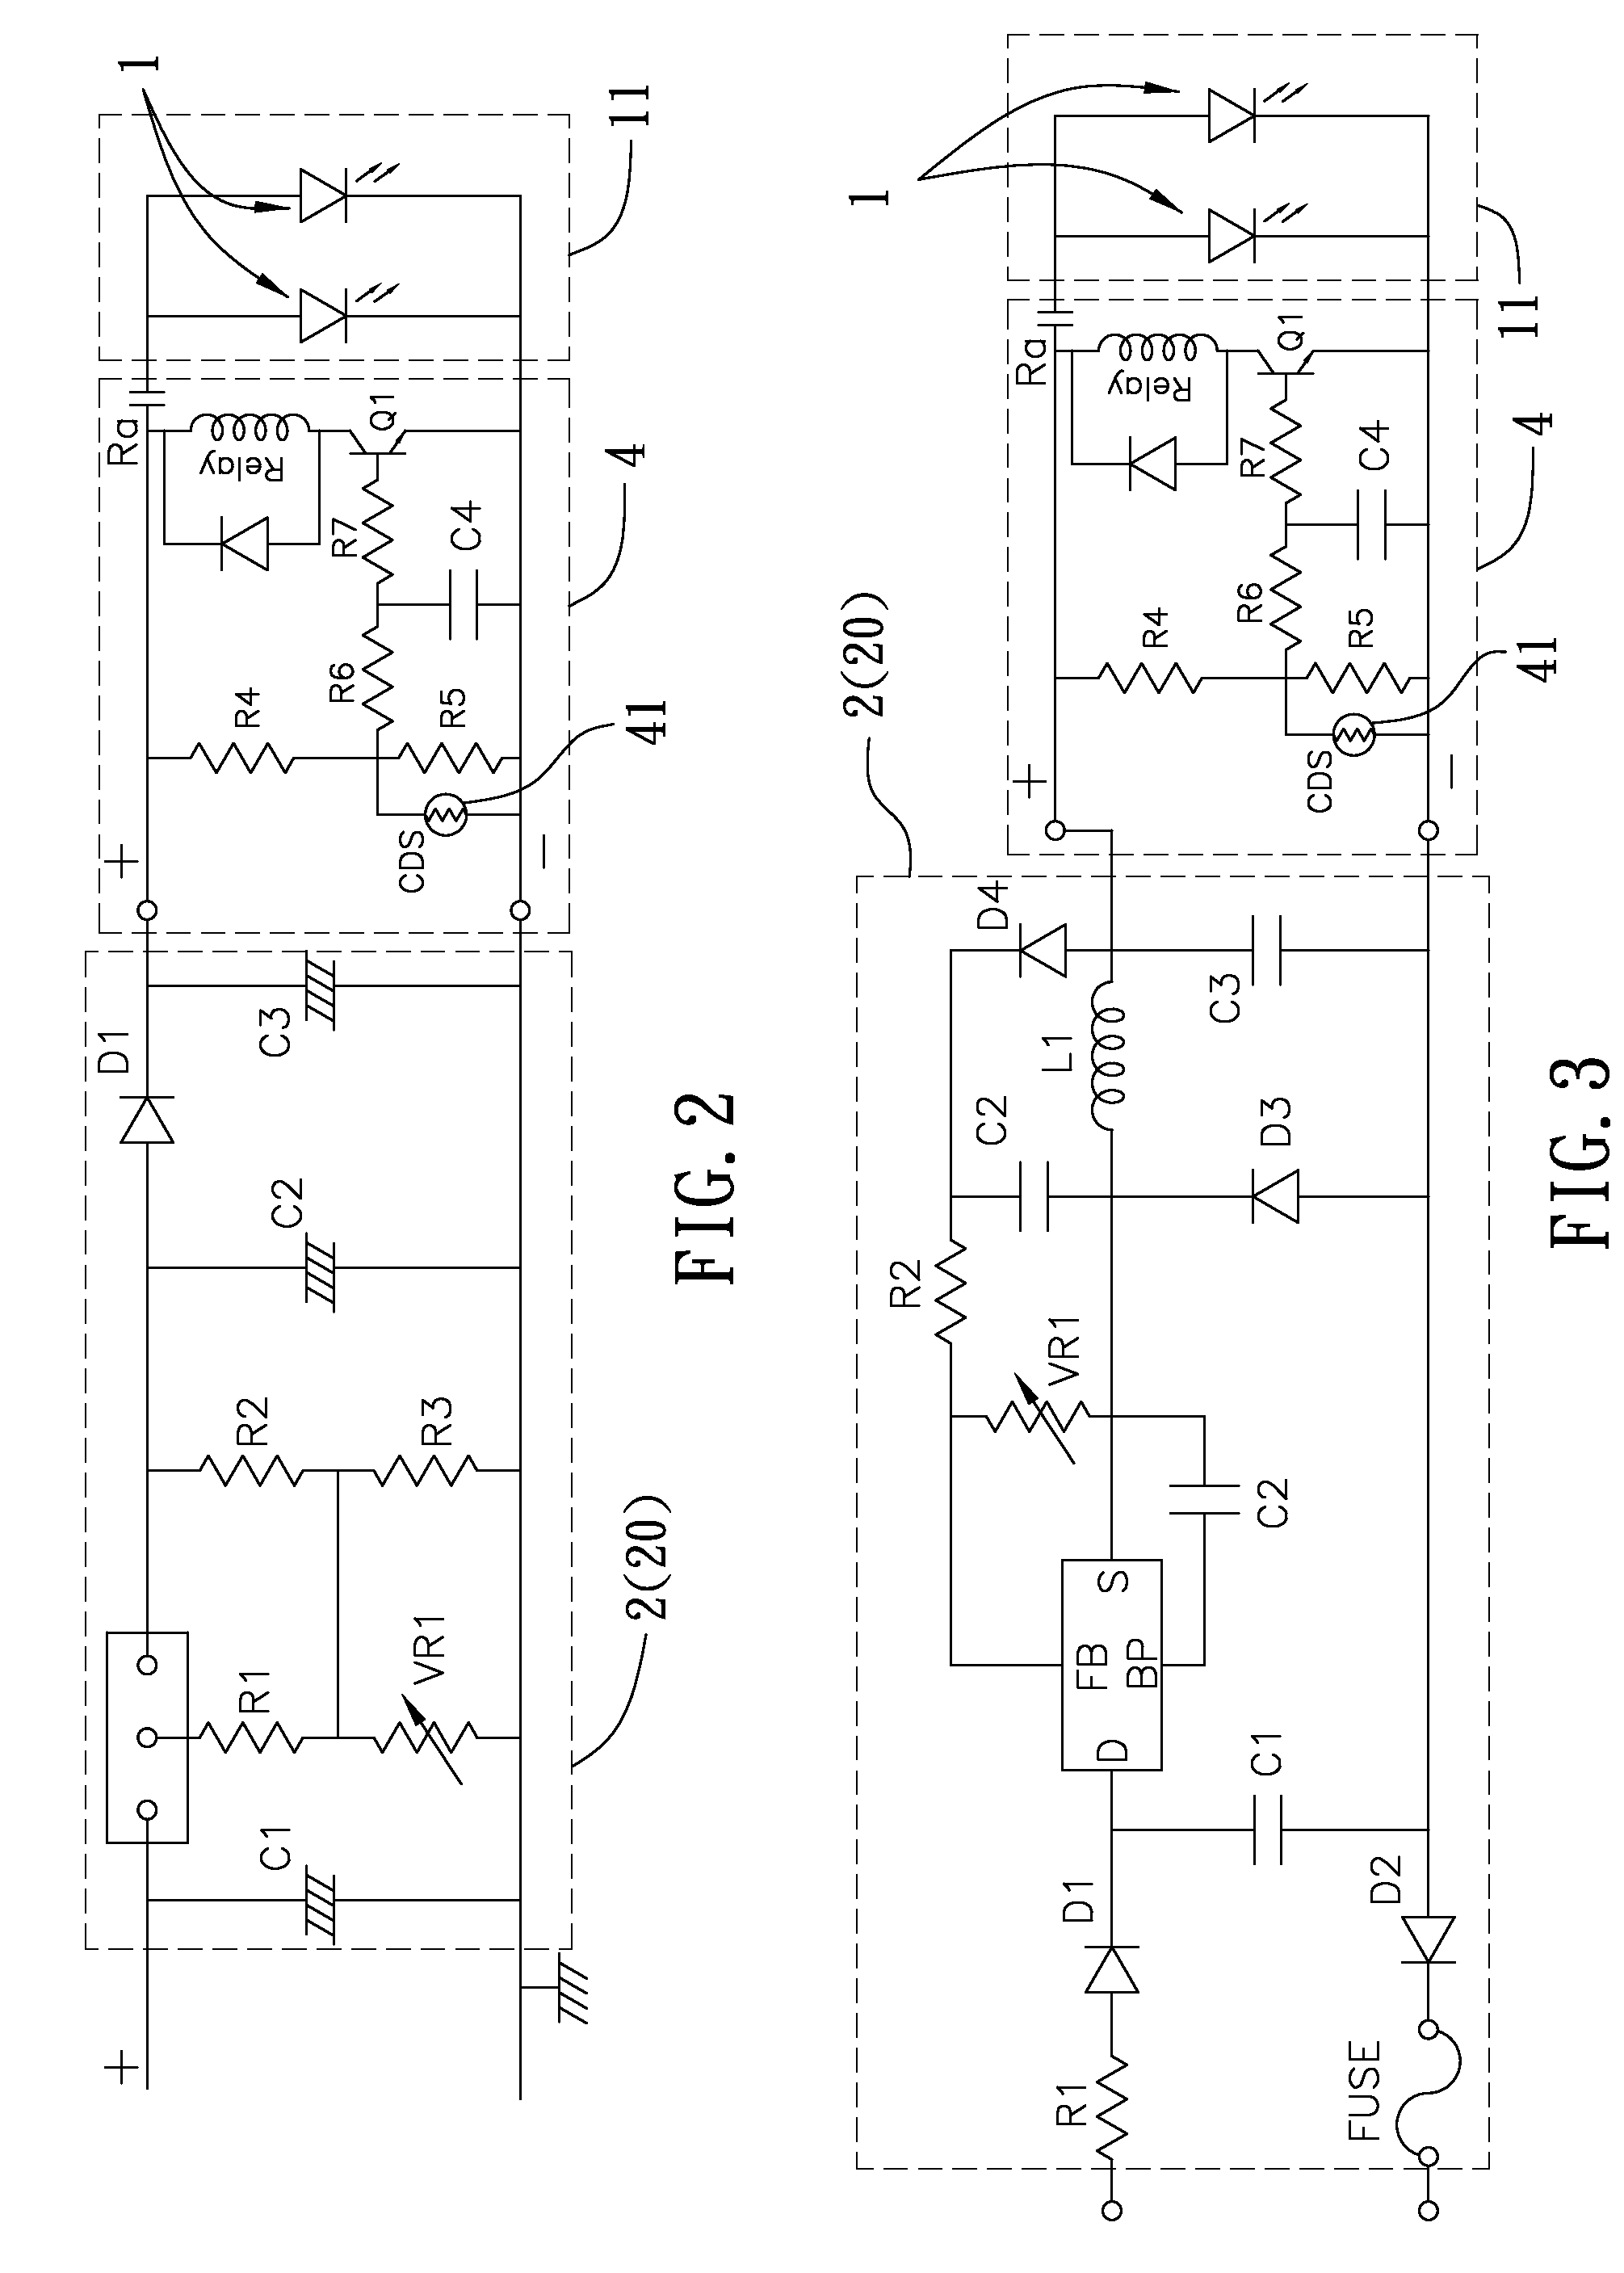 Illuminating Device and system for Killing and/or Intefering with Pests, and Method for Killing and/or Interfering with Pests